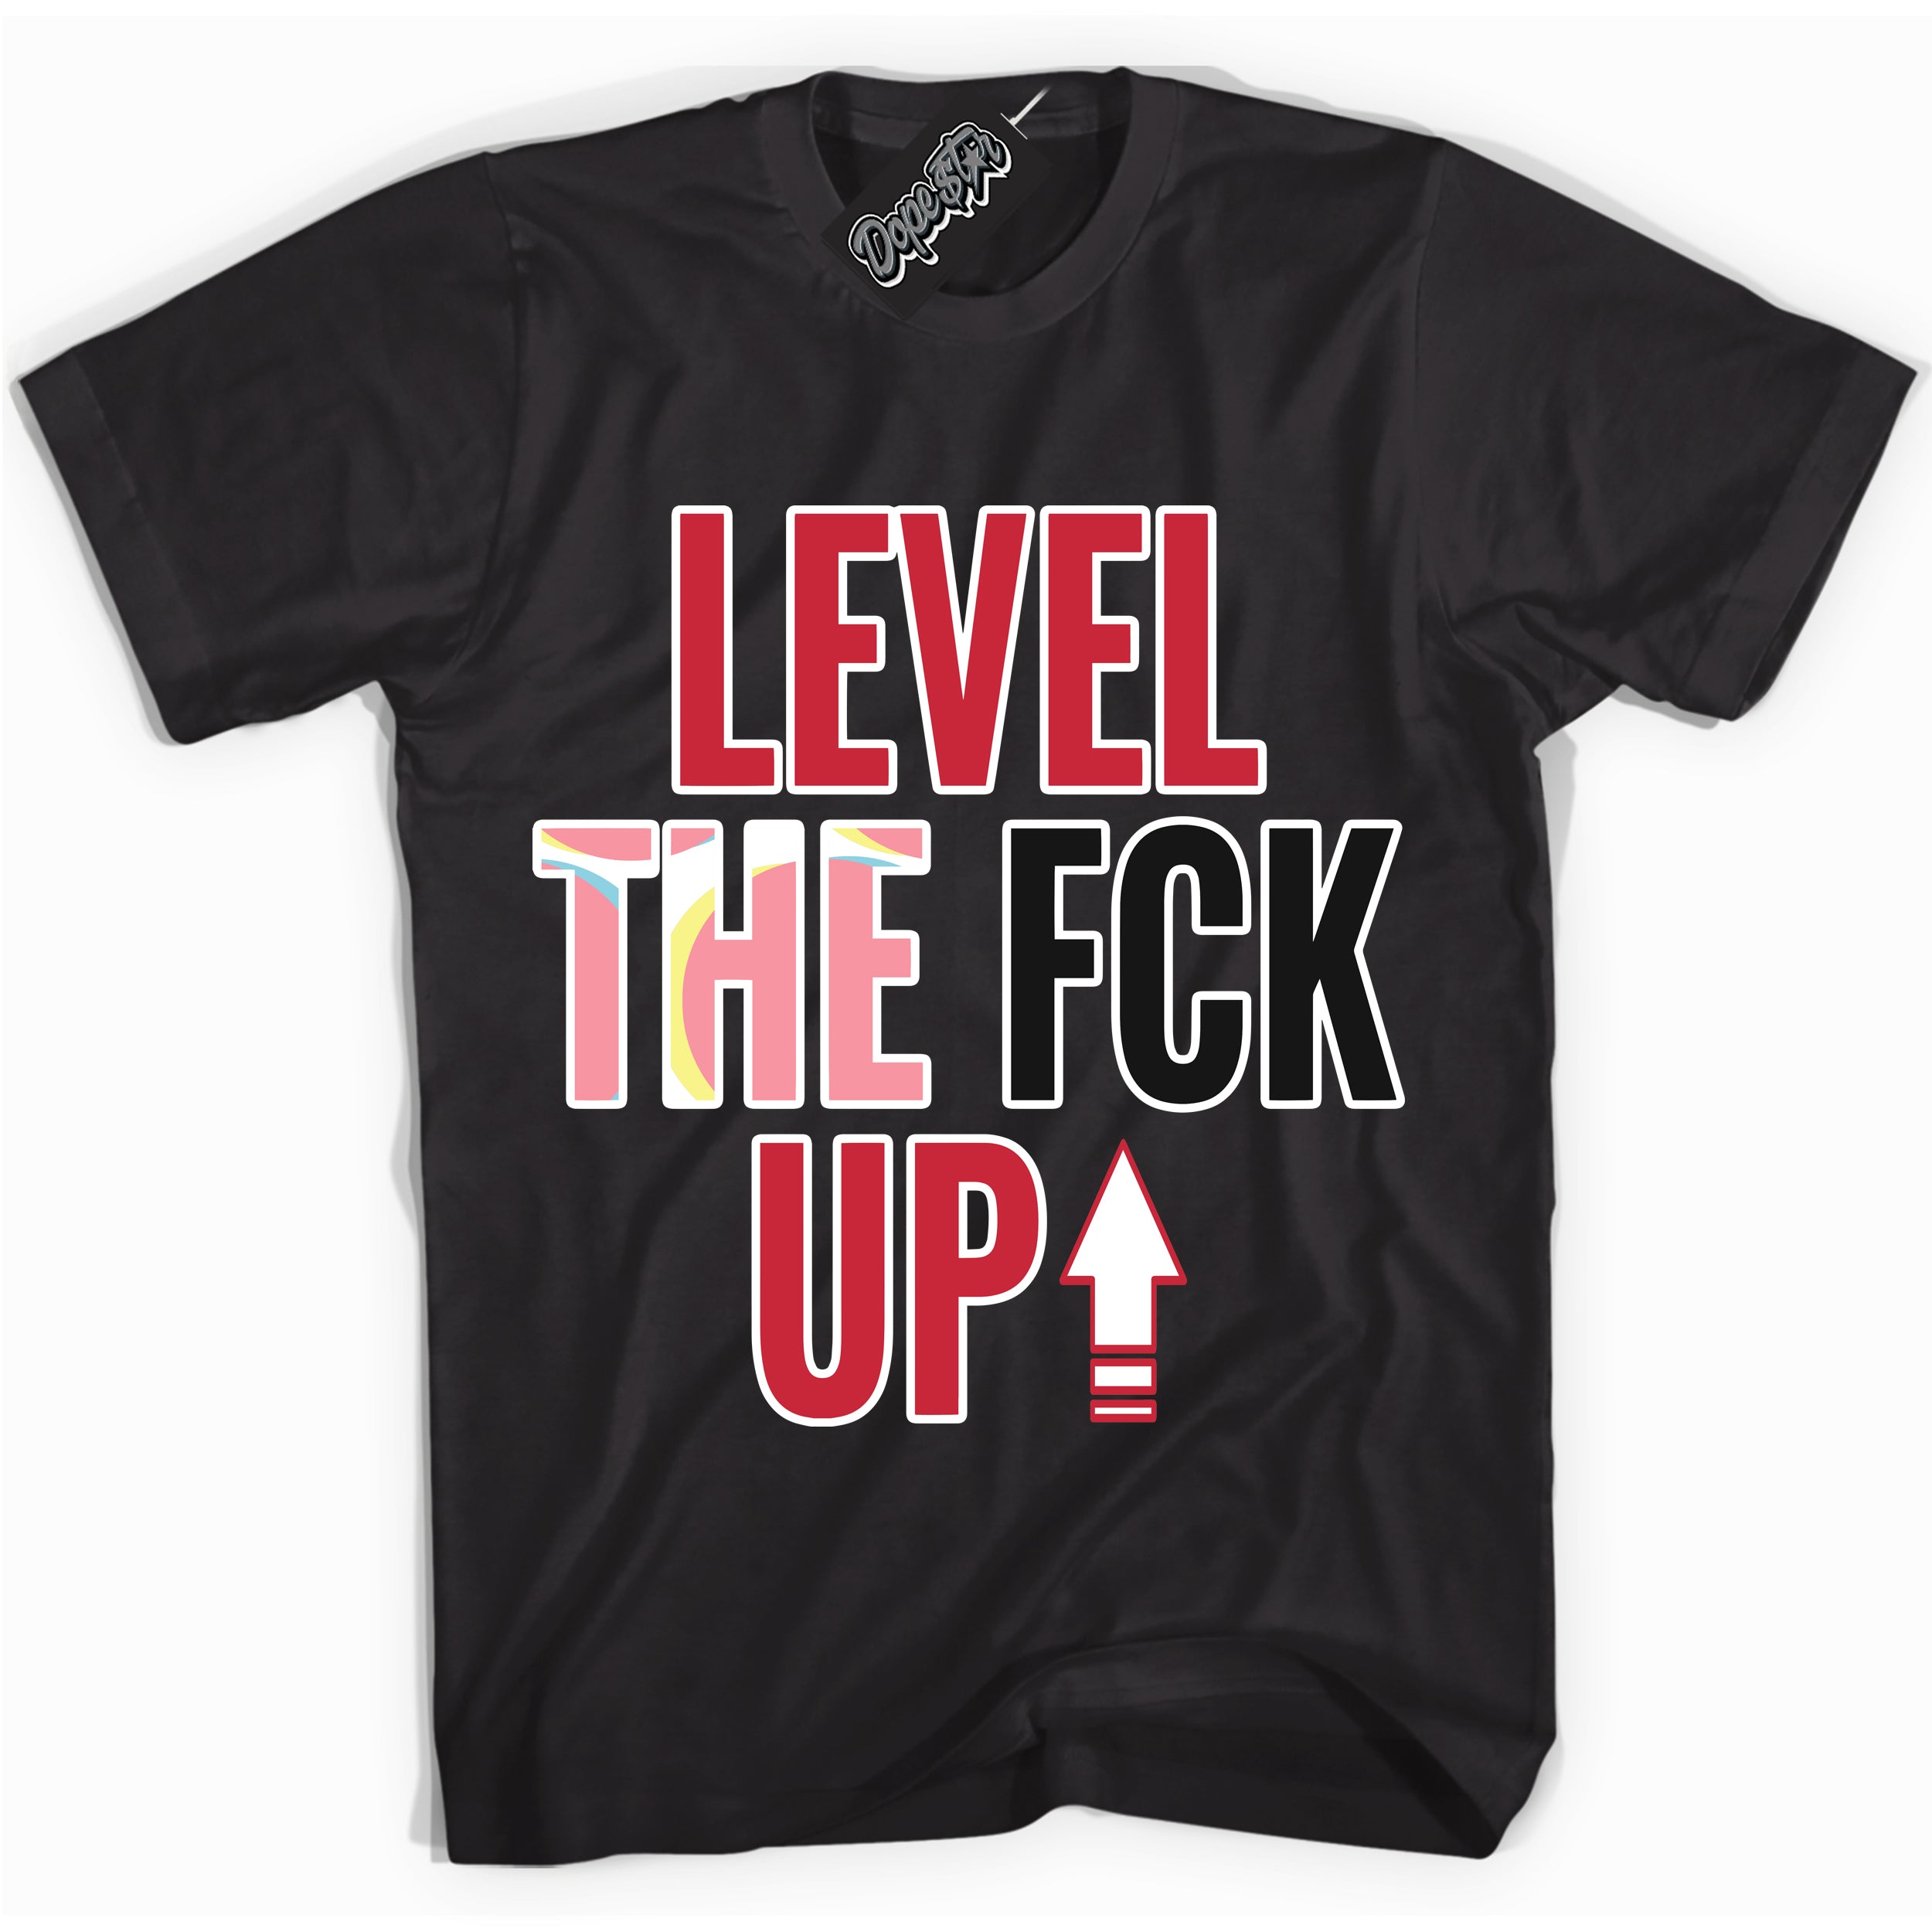 Cool Black graphic tee with “ Level The Fck Up ” design, that perfectly matches Spider-Verse 1s sneakers 